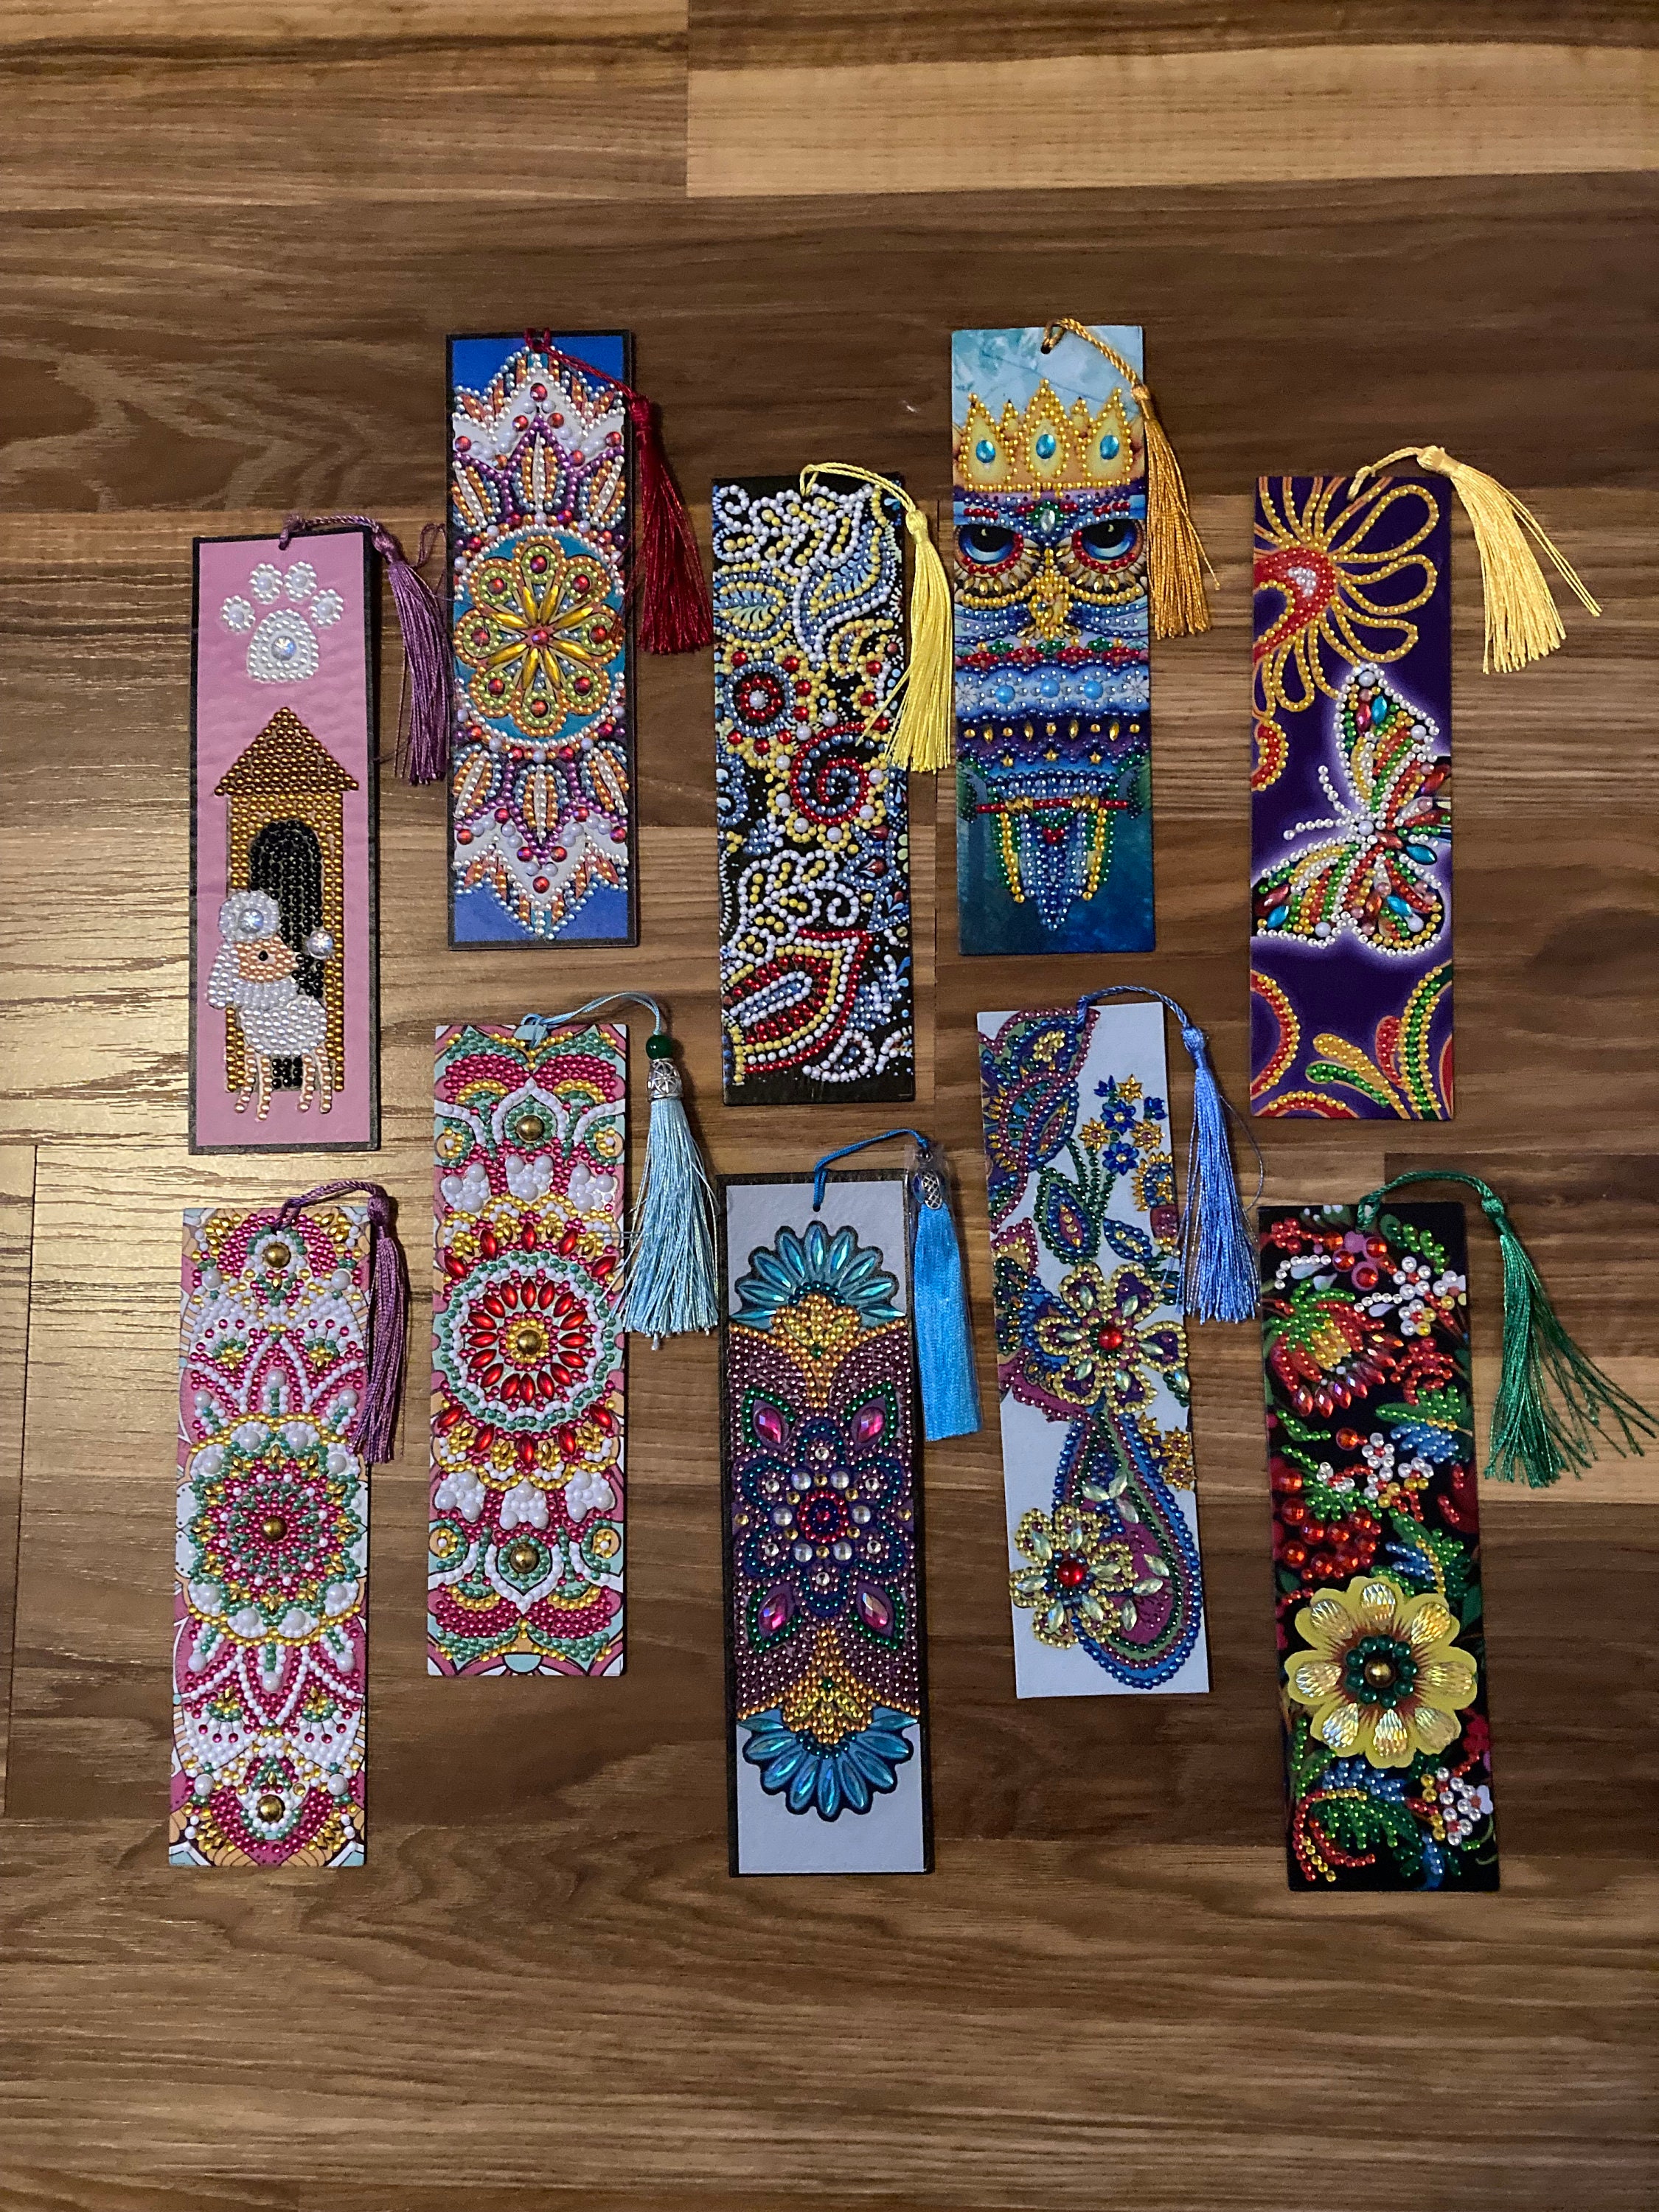 8 Pieces 5D Diamond Painting Bookmarks Floral Rhinestone Bookmarks PU  Leather Art Bookmarks DIY Diamond Painting Bookmarks Mandala Style  Bookmarks